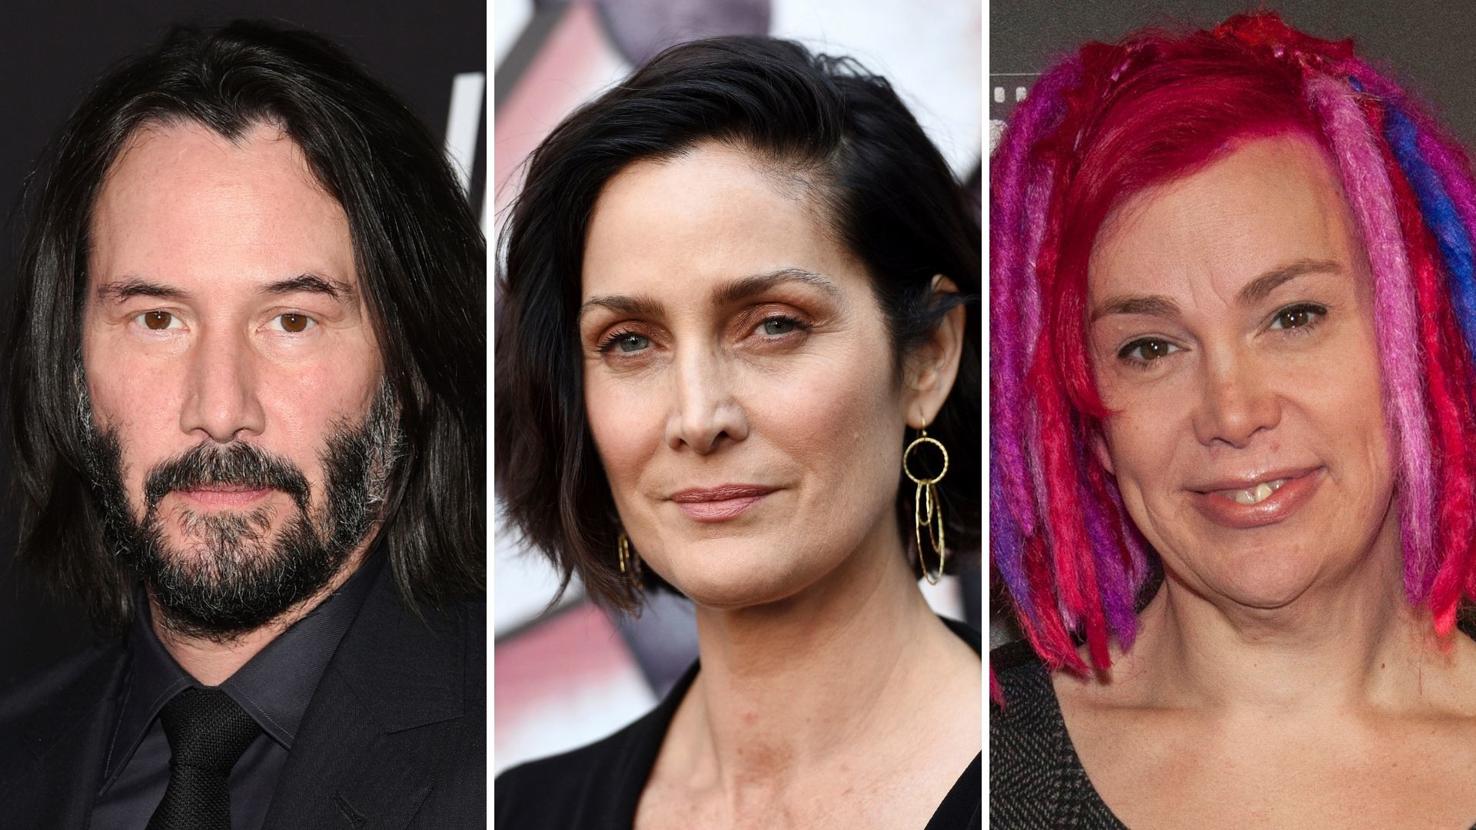 Keanu Reeves Carrie Anne Moss And Lana Wachowski Are Returning For A